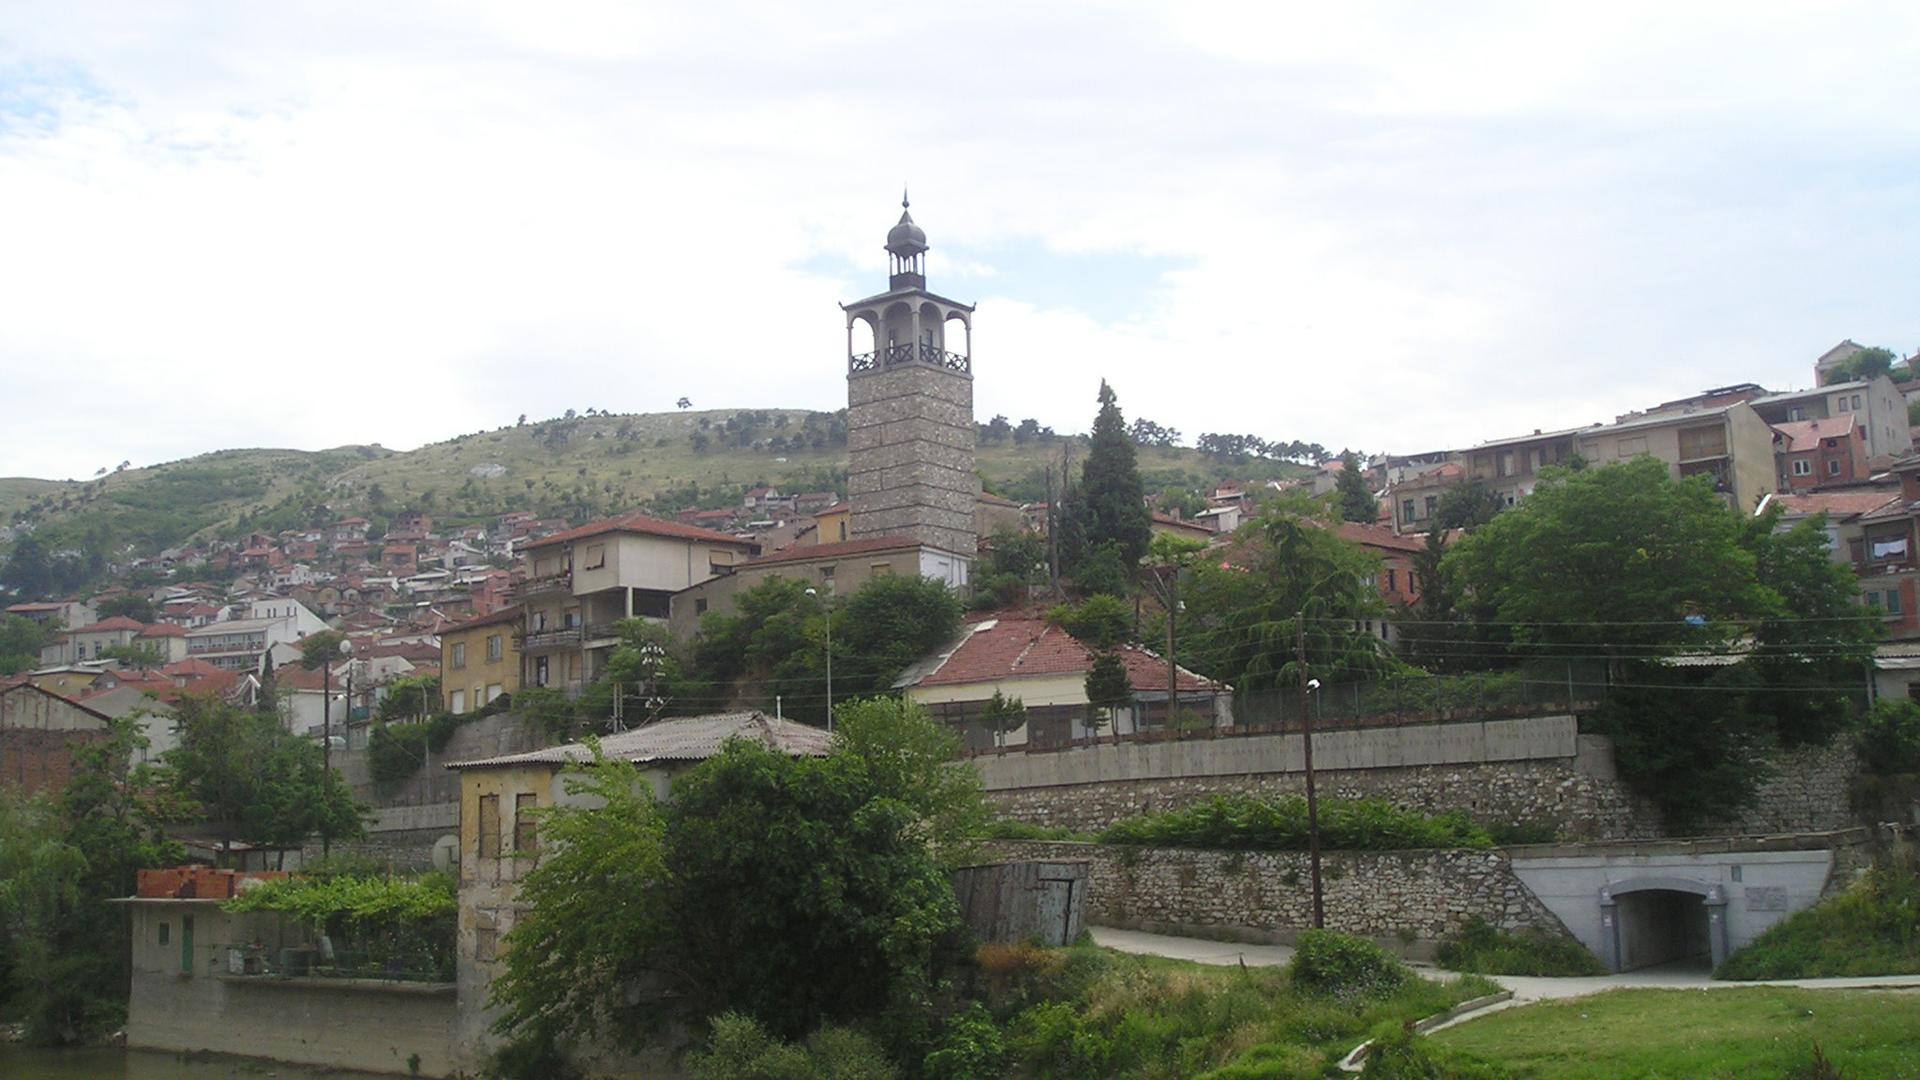 The scenic town of Veles, Macedonia, is home to at least 100 false US news sites.